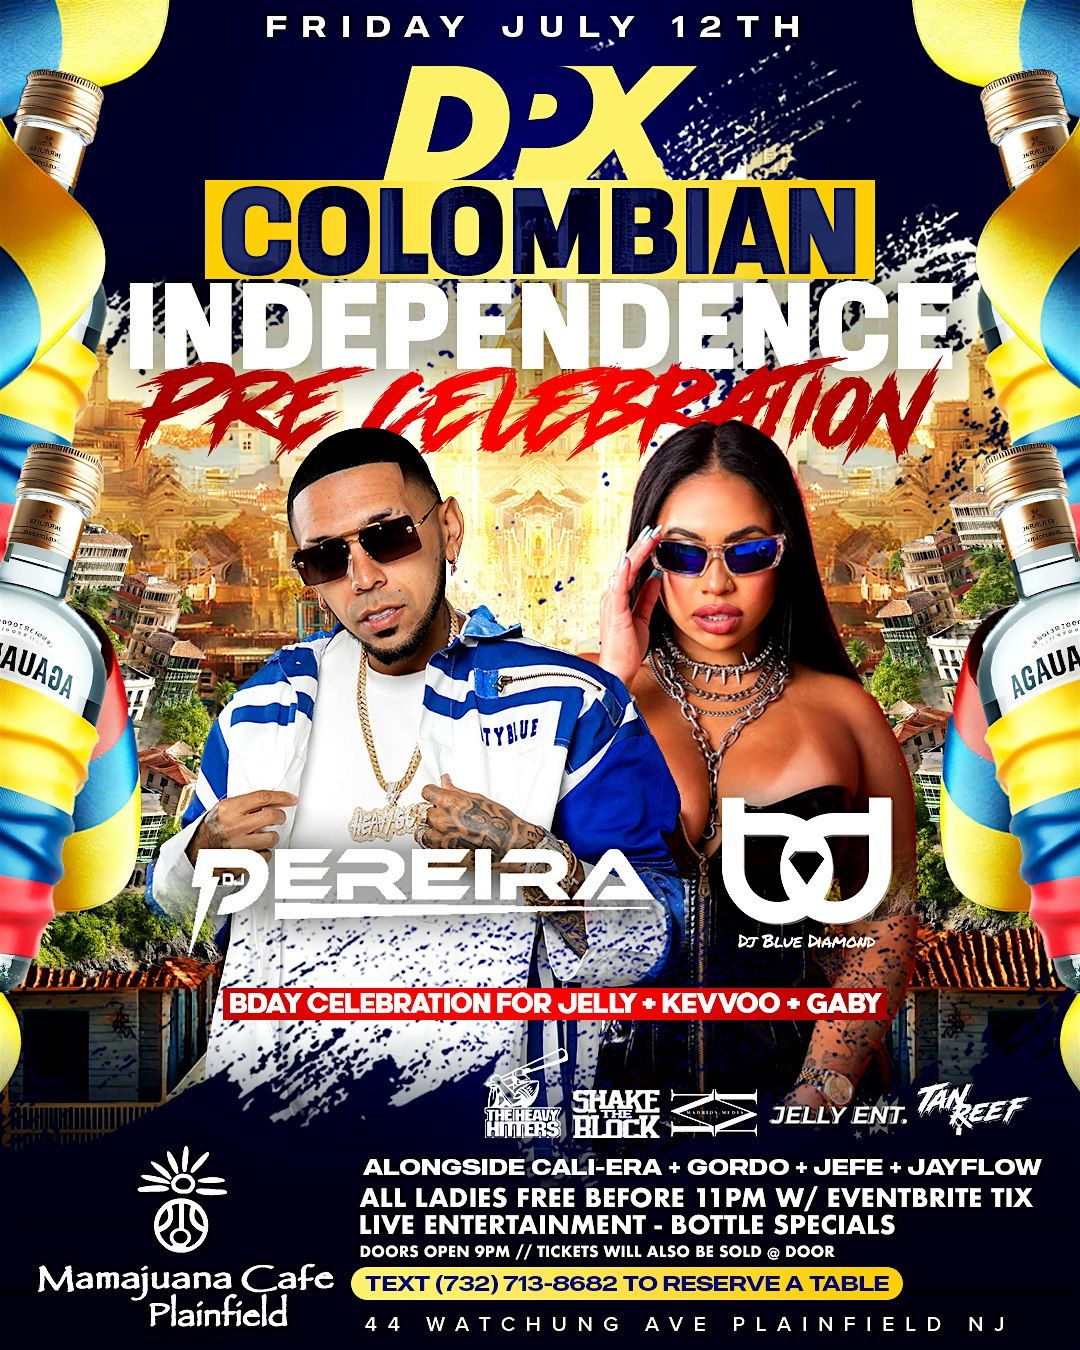 DPX COLOMBIAN INDEPENDENCE PRE CELEBRATION